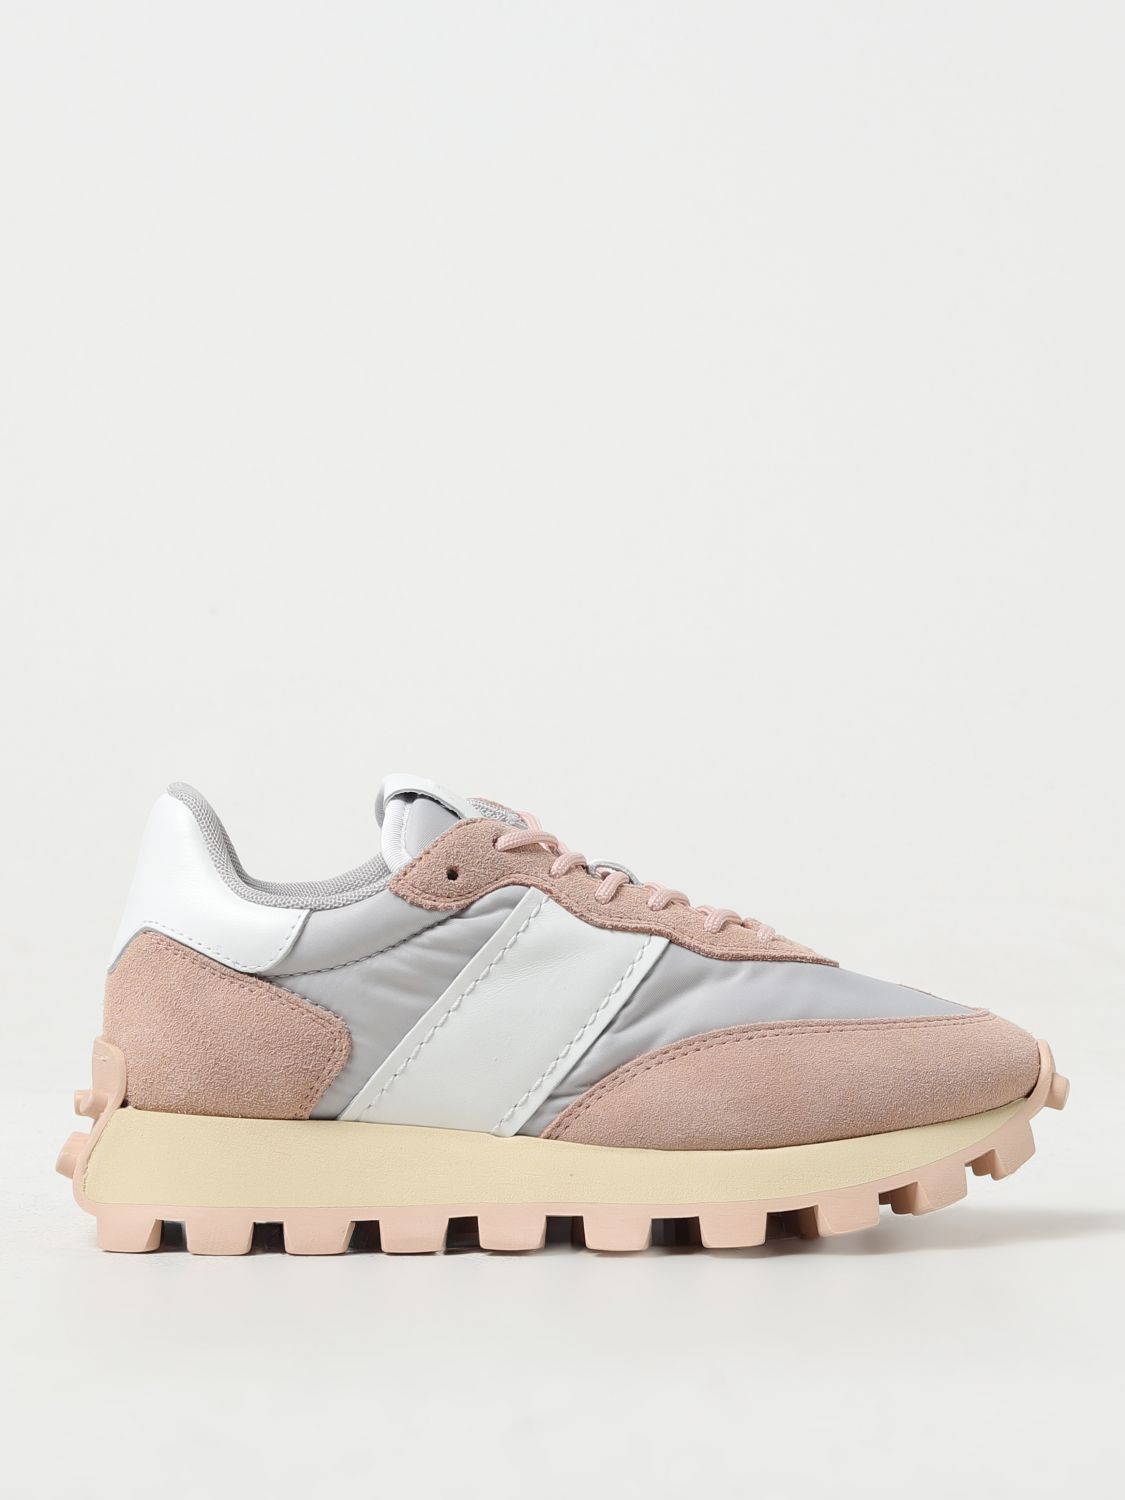 Tod's Woman Sneakers Blush Size 8 Leather, Textile Fibers In Blush Pink